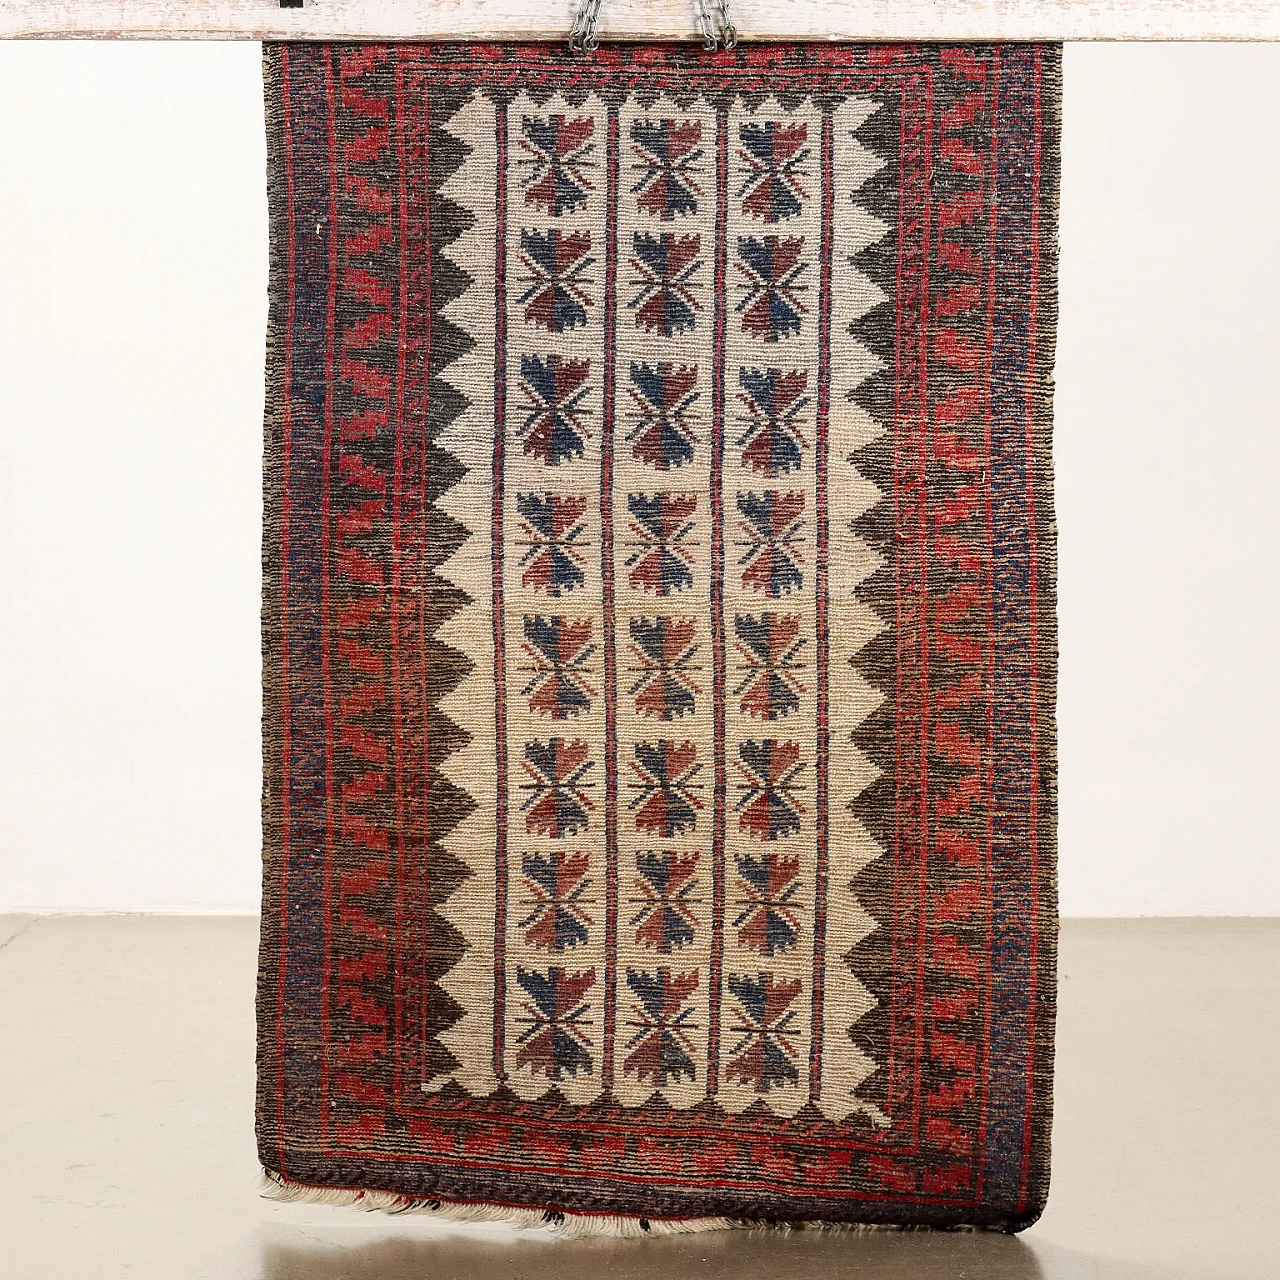 Iranian red, blue and beige wool Beluchi rug 6